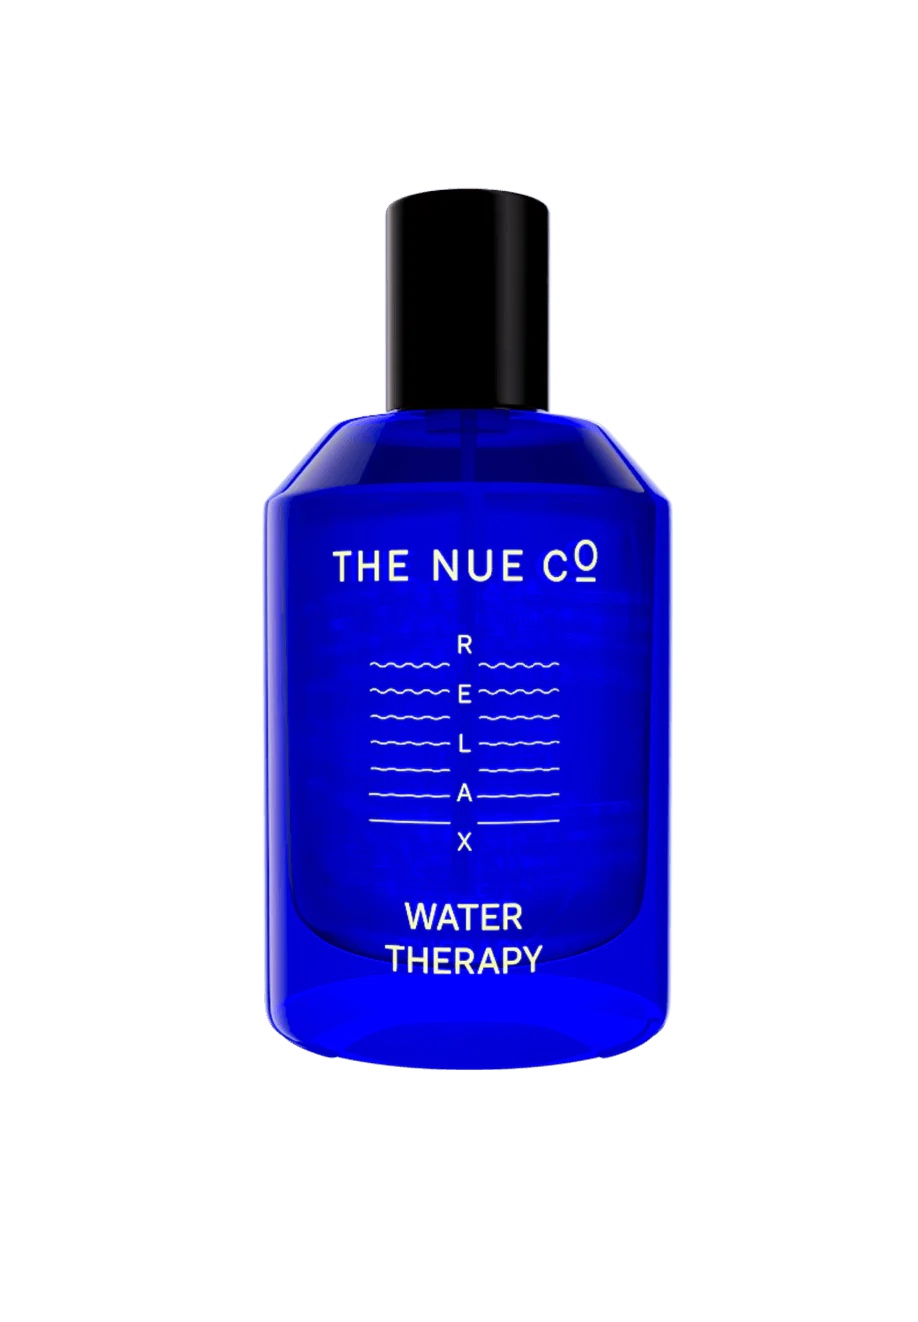 The Nue Co Water Therapy bottle